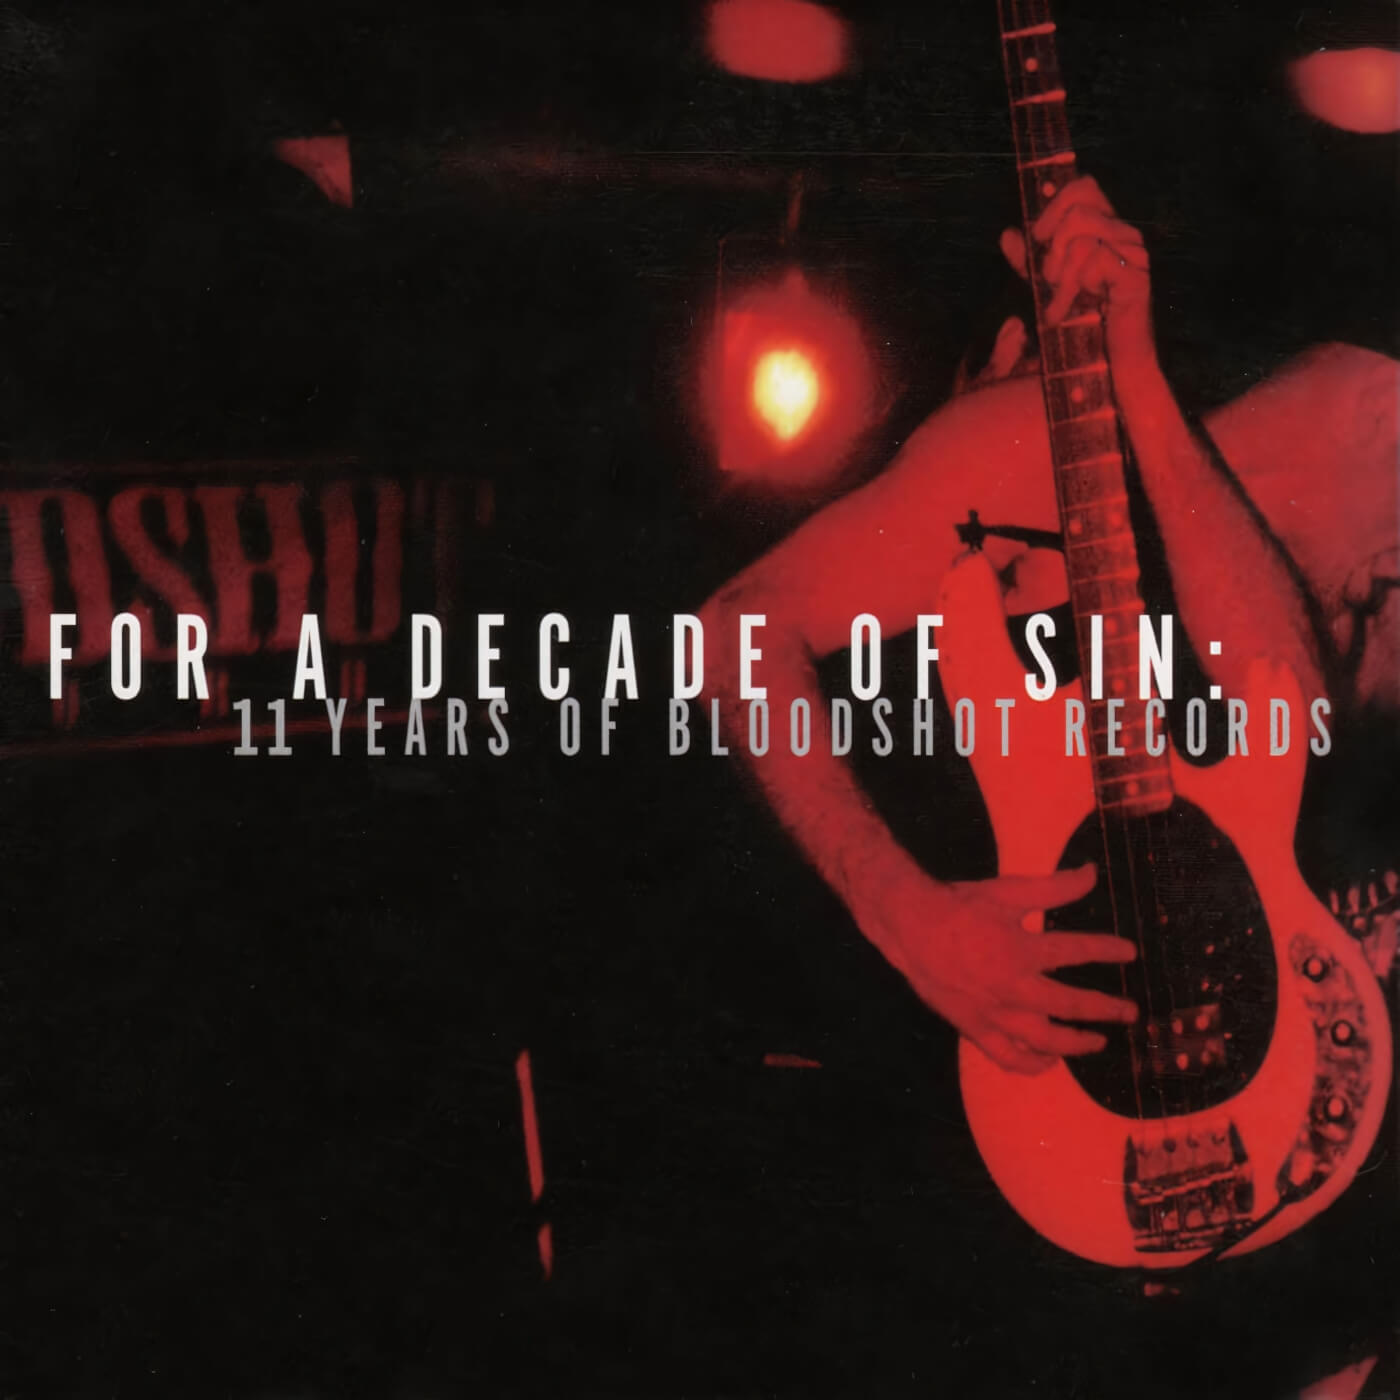 For A Decade of Sin: 11 Years of Bloodshot Records